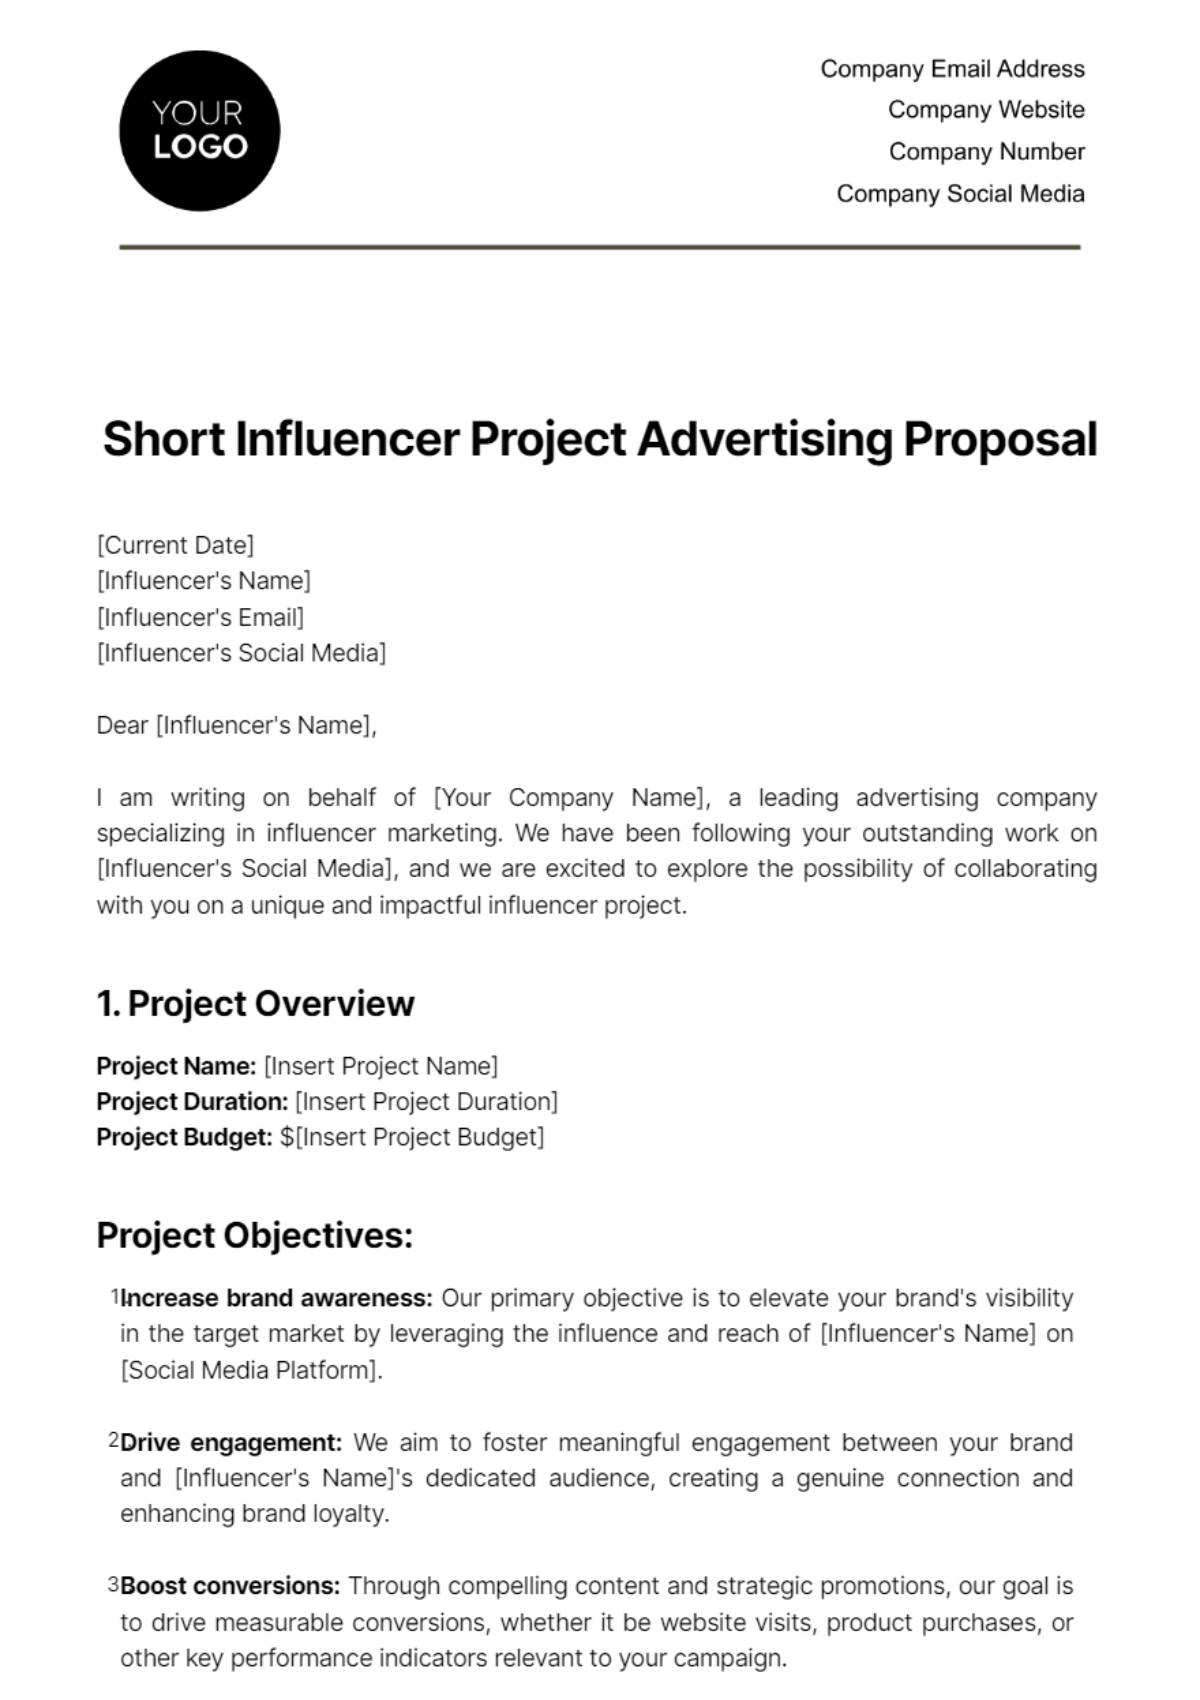 Free Short Influencer Project Advertising Proposal Template